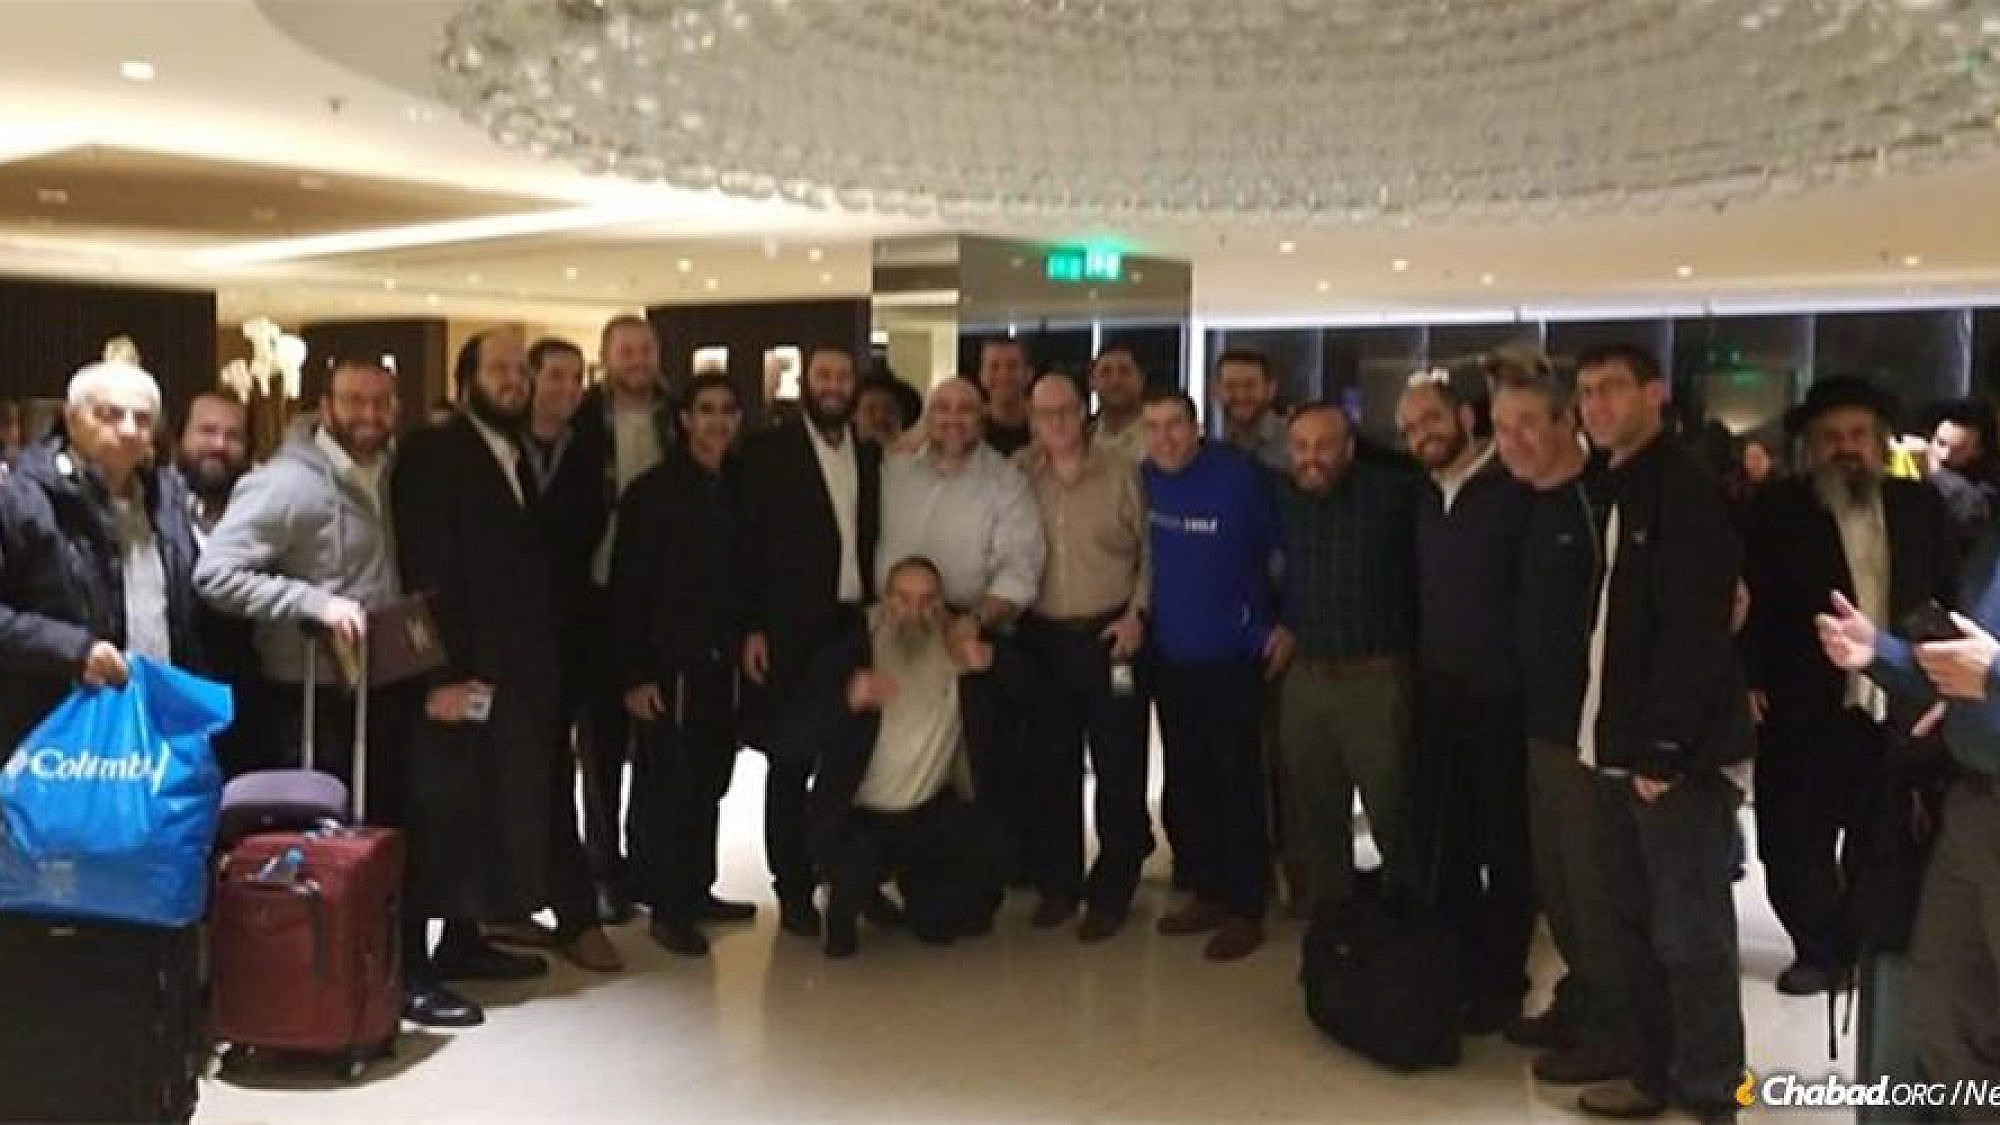 Some of the 150 El Al passengers who unexpectedly spent a Shabbat together in Athens, Nov. 16, 2018. Credit: Chabad.org/News.